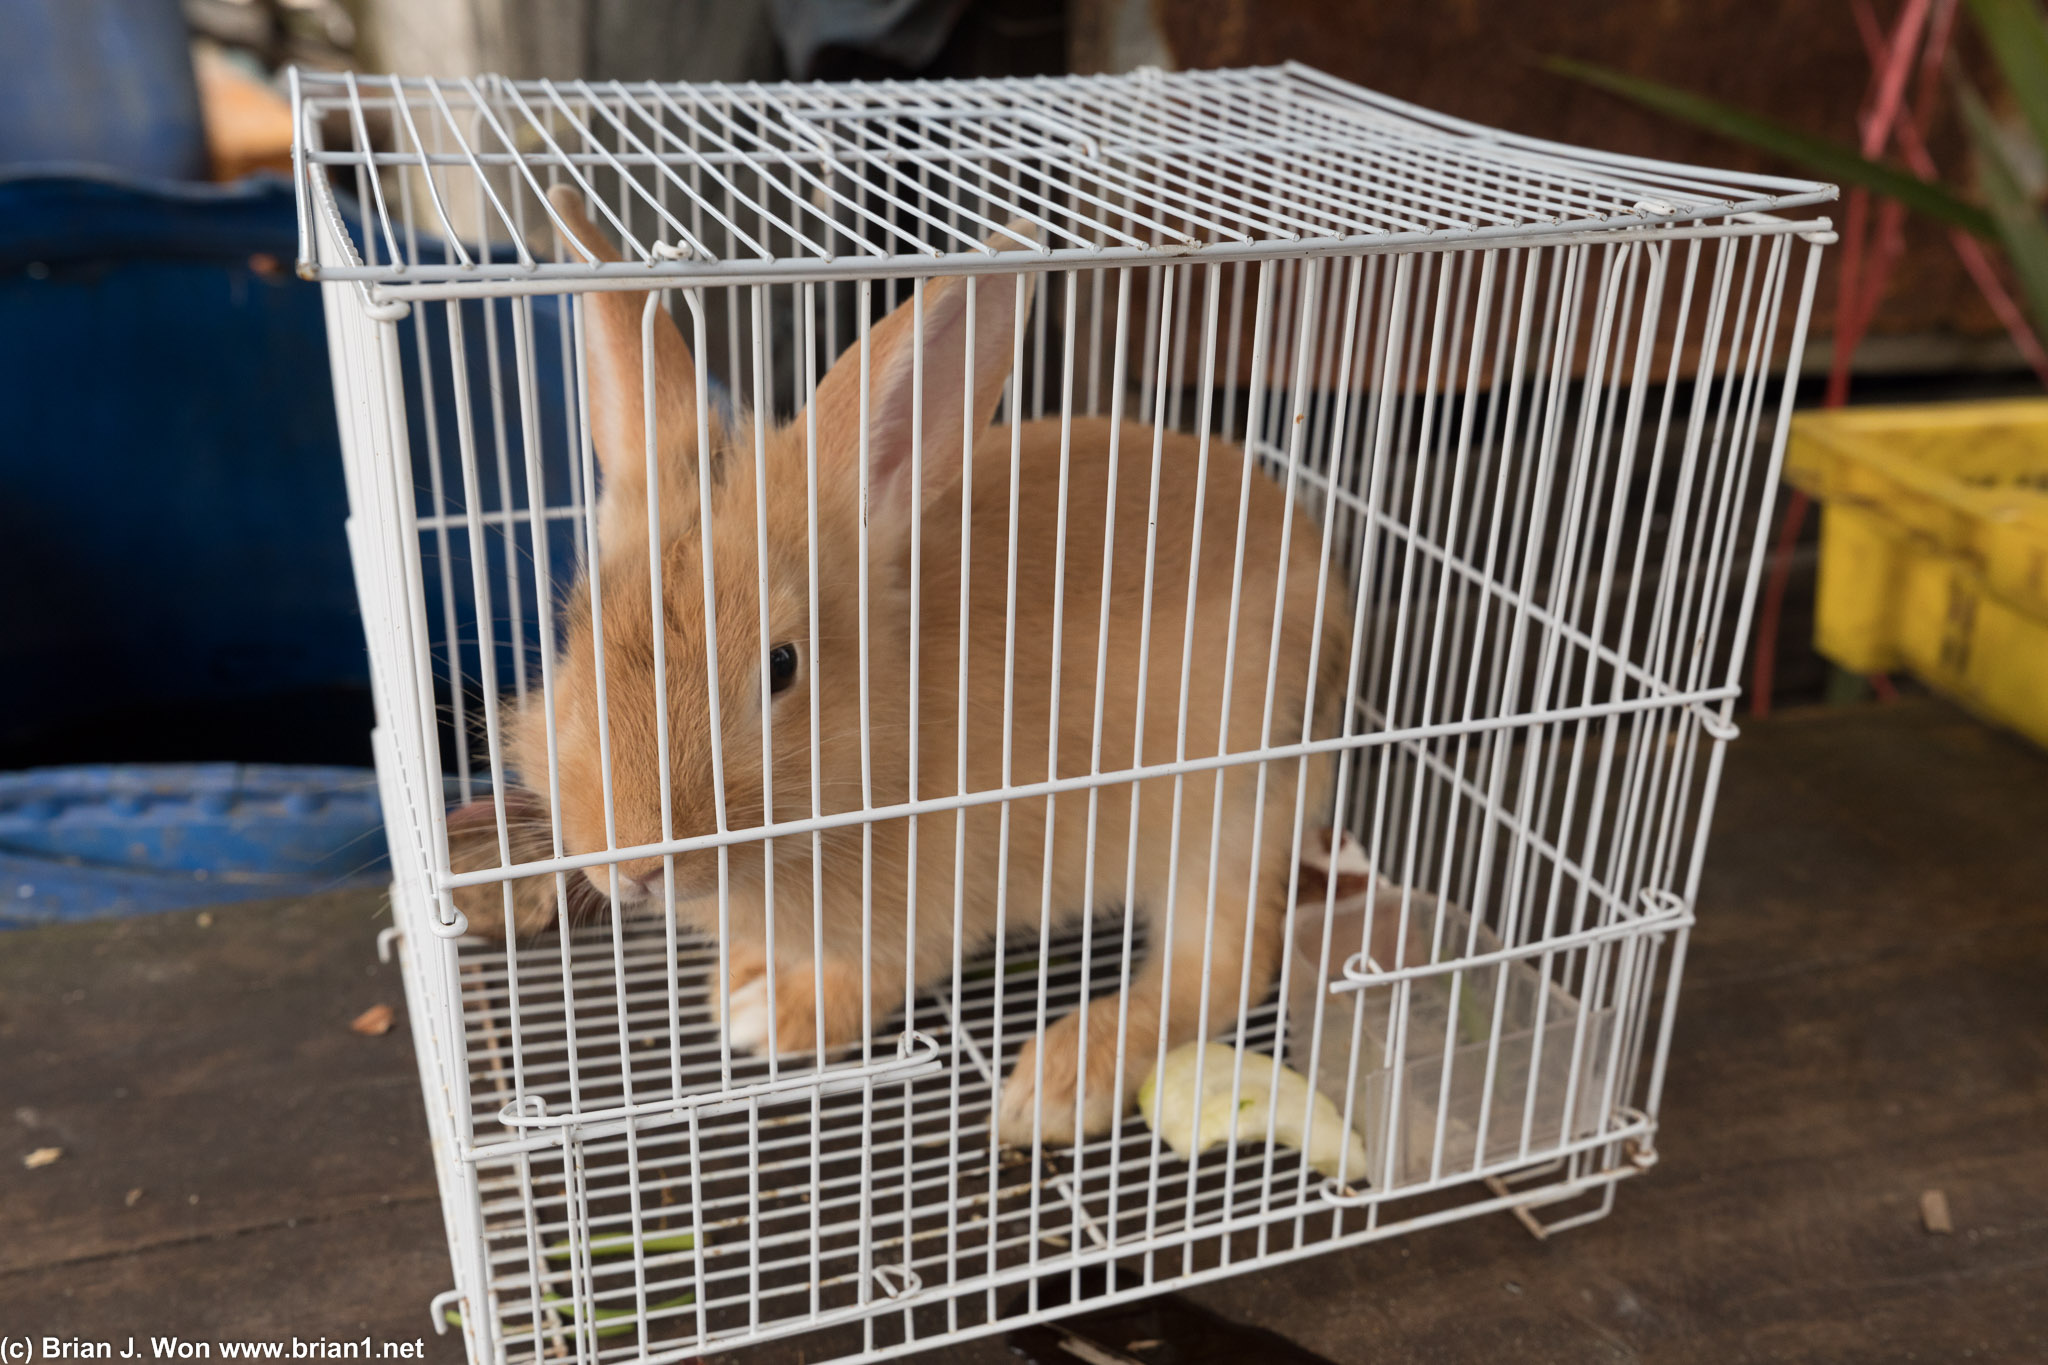 They have rabbits as pets here?? (poor guy in a wire floored cage :-( ).